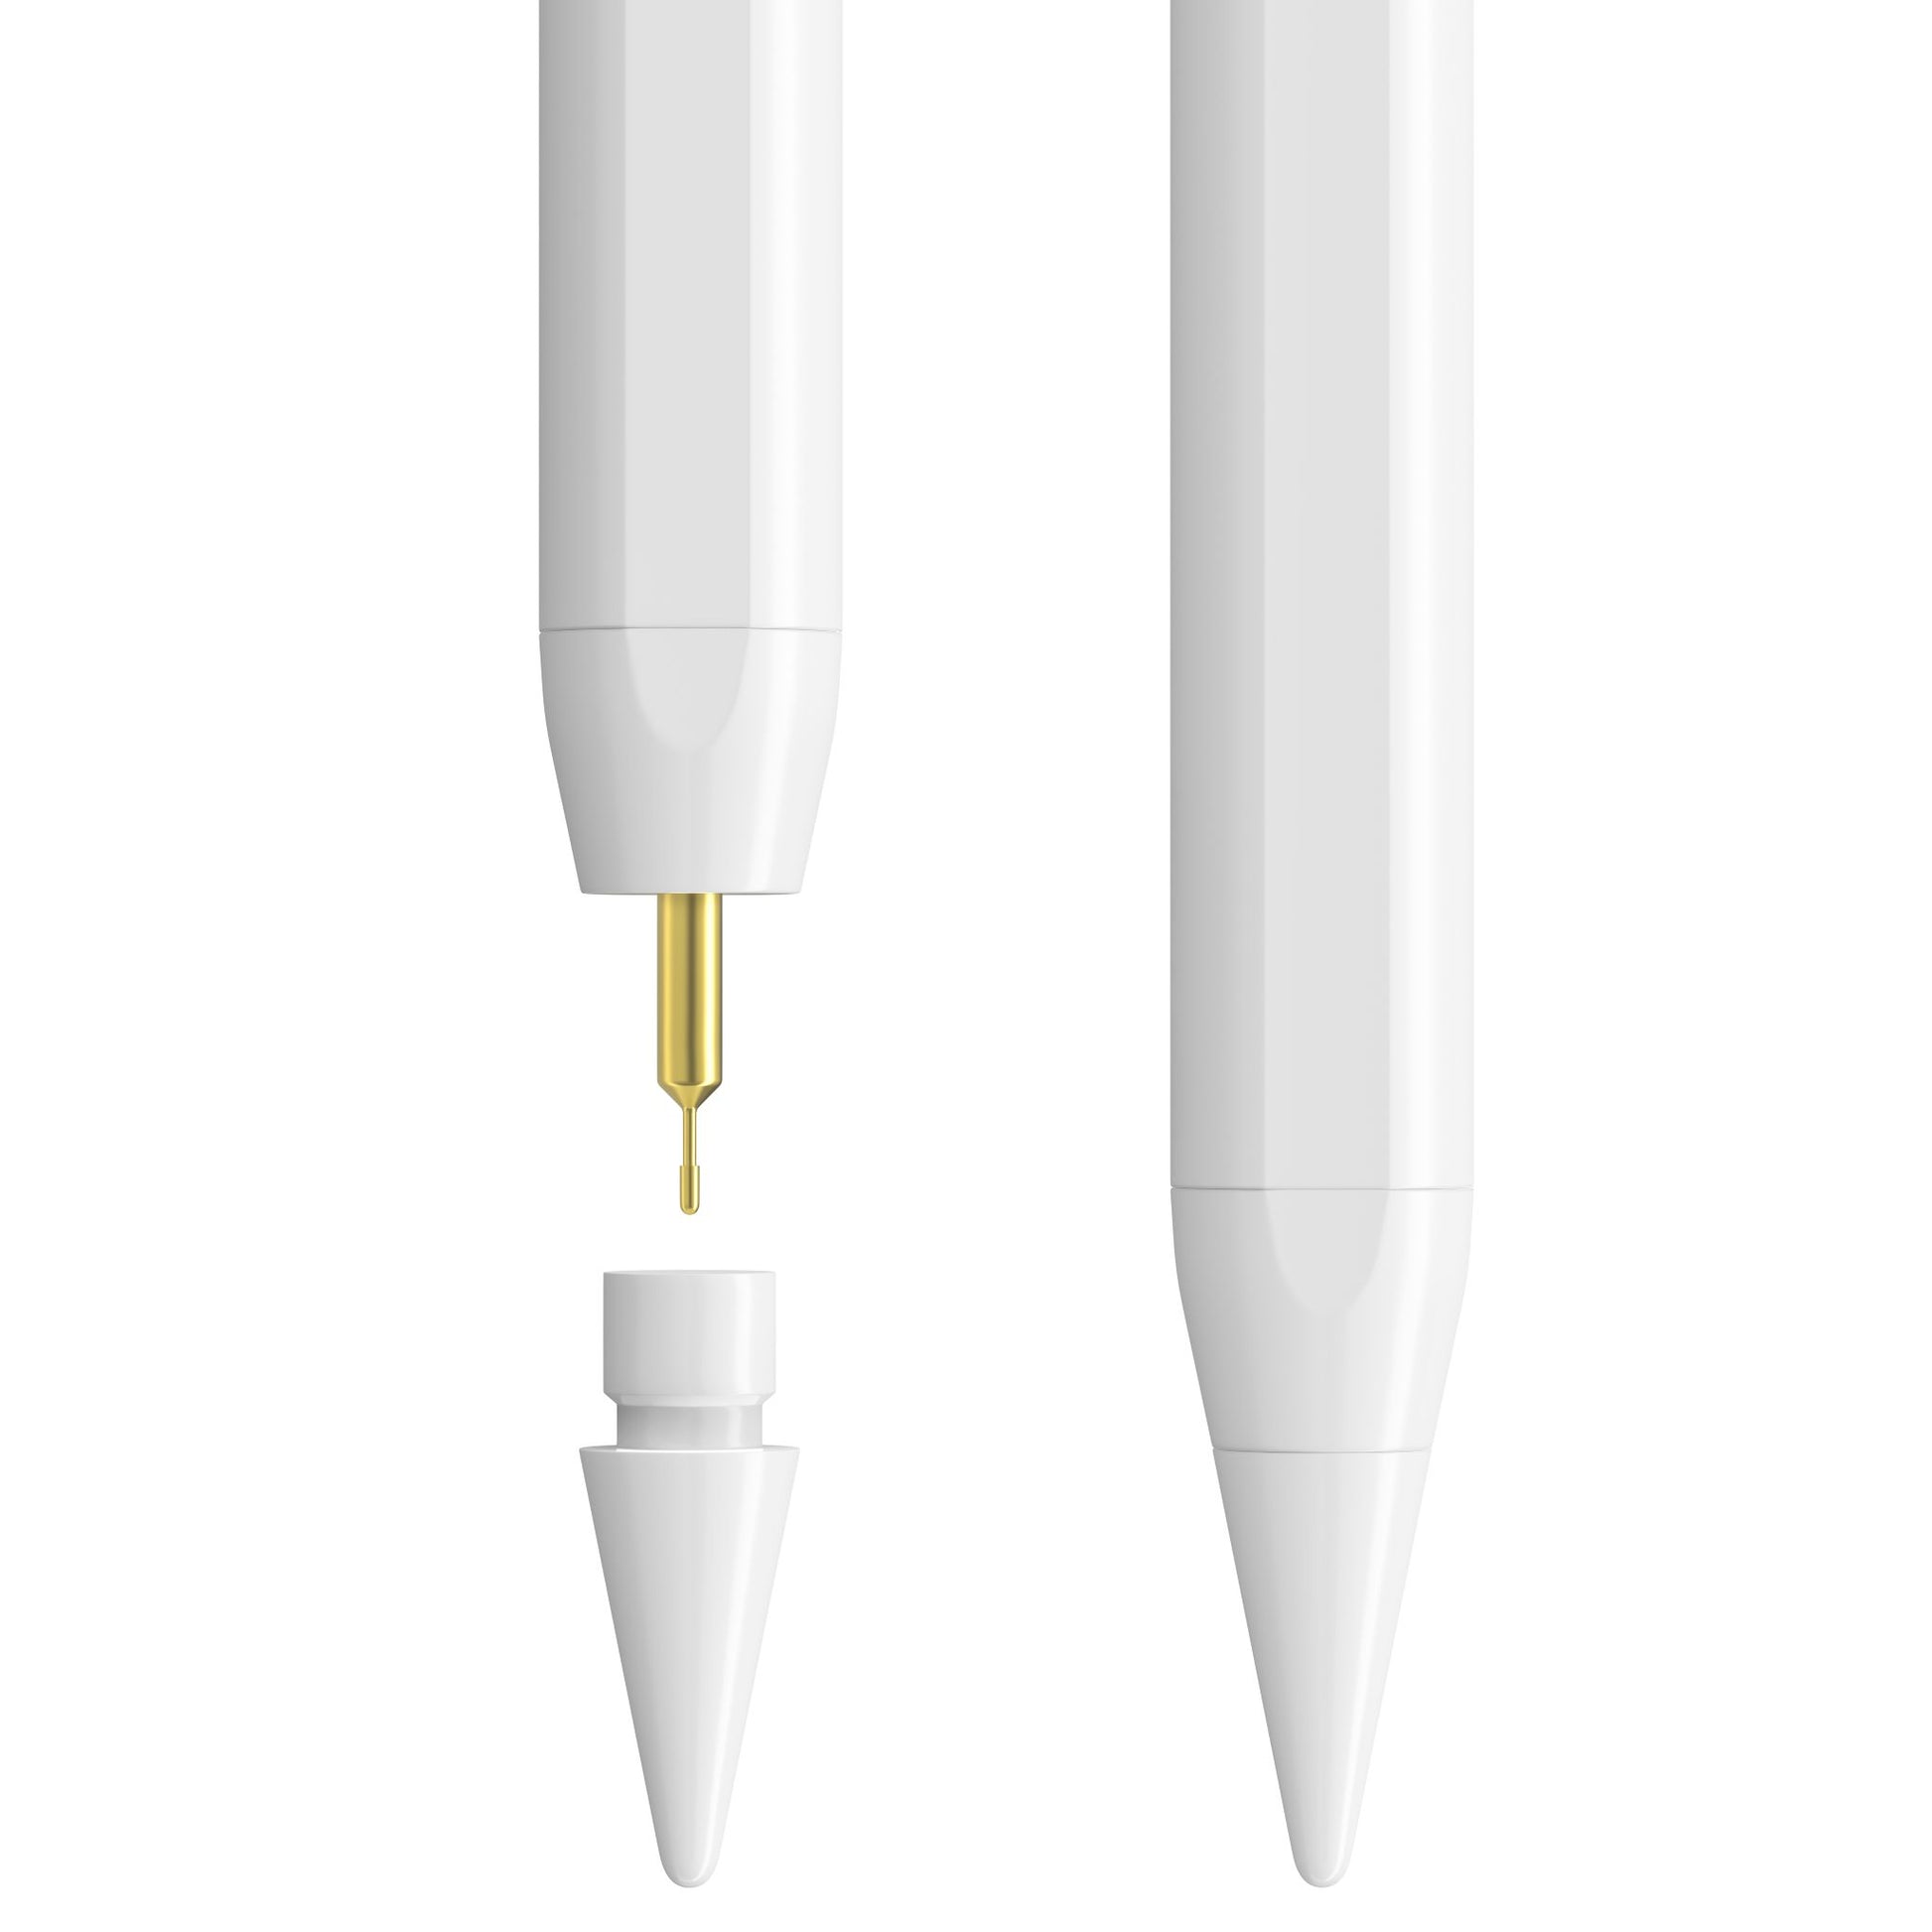 Tinymoose Pencil Pro Stylus Pen showing Nib removal and replacement